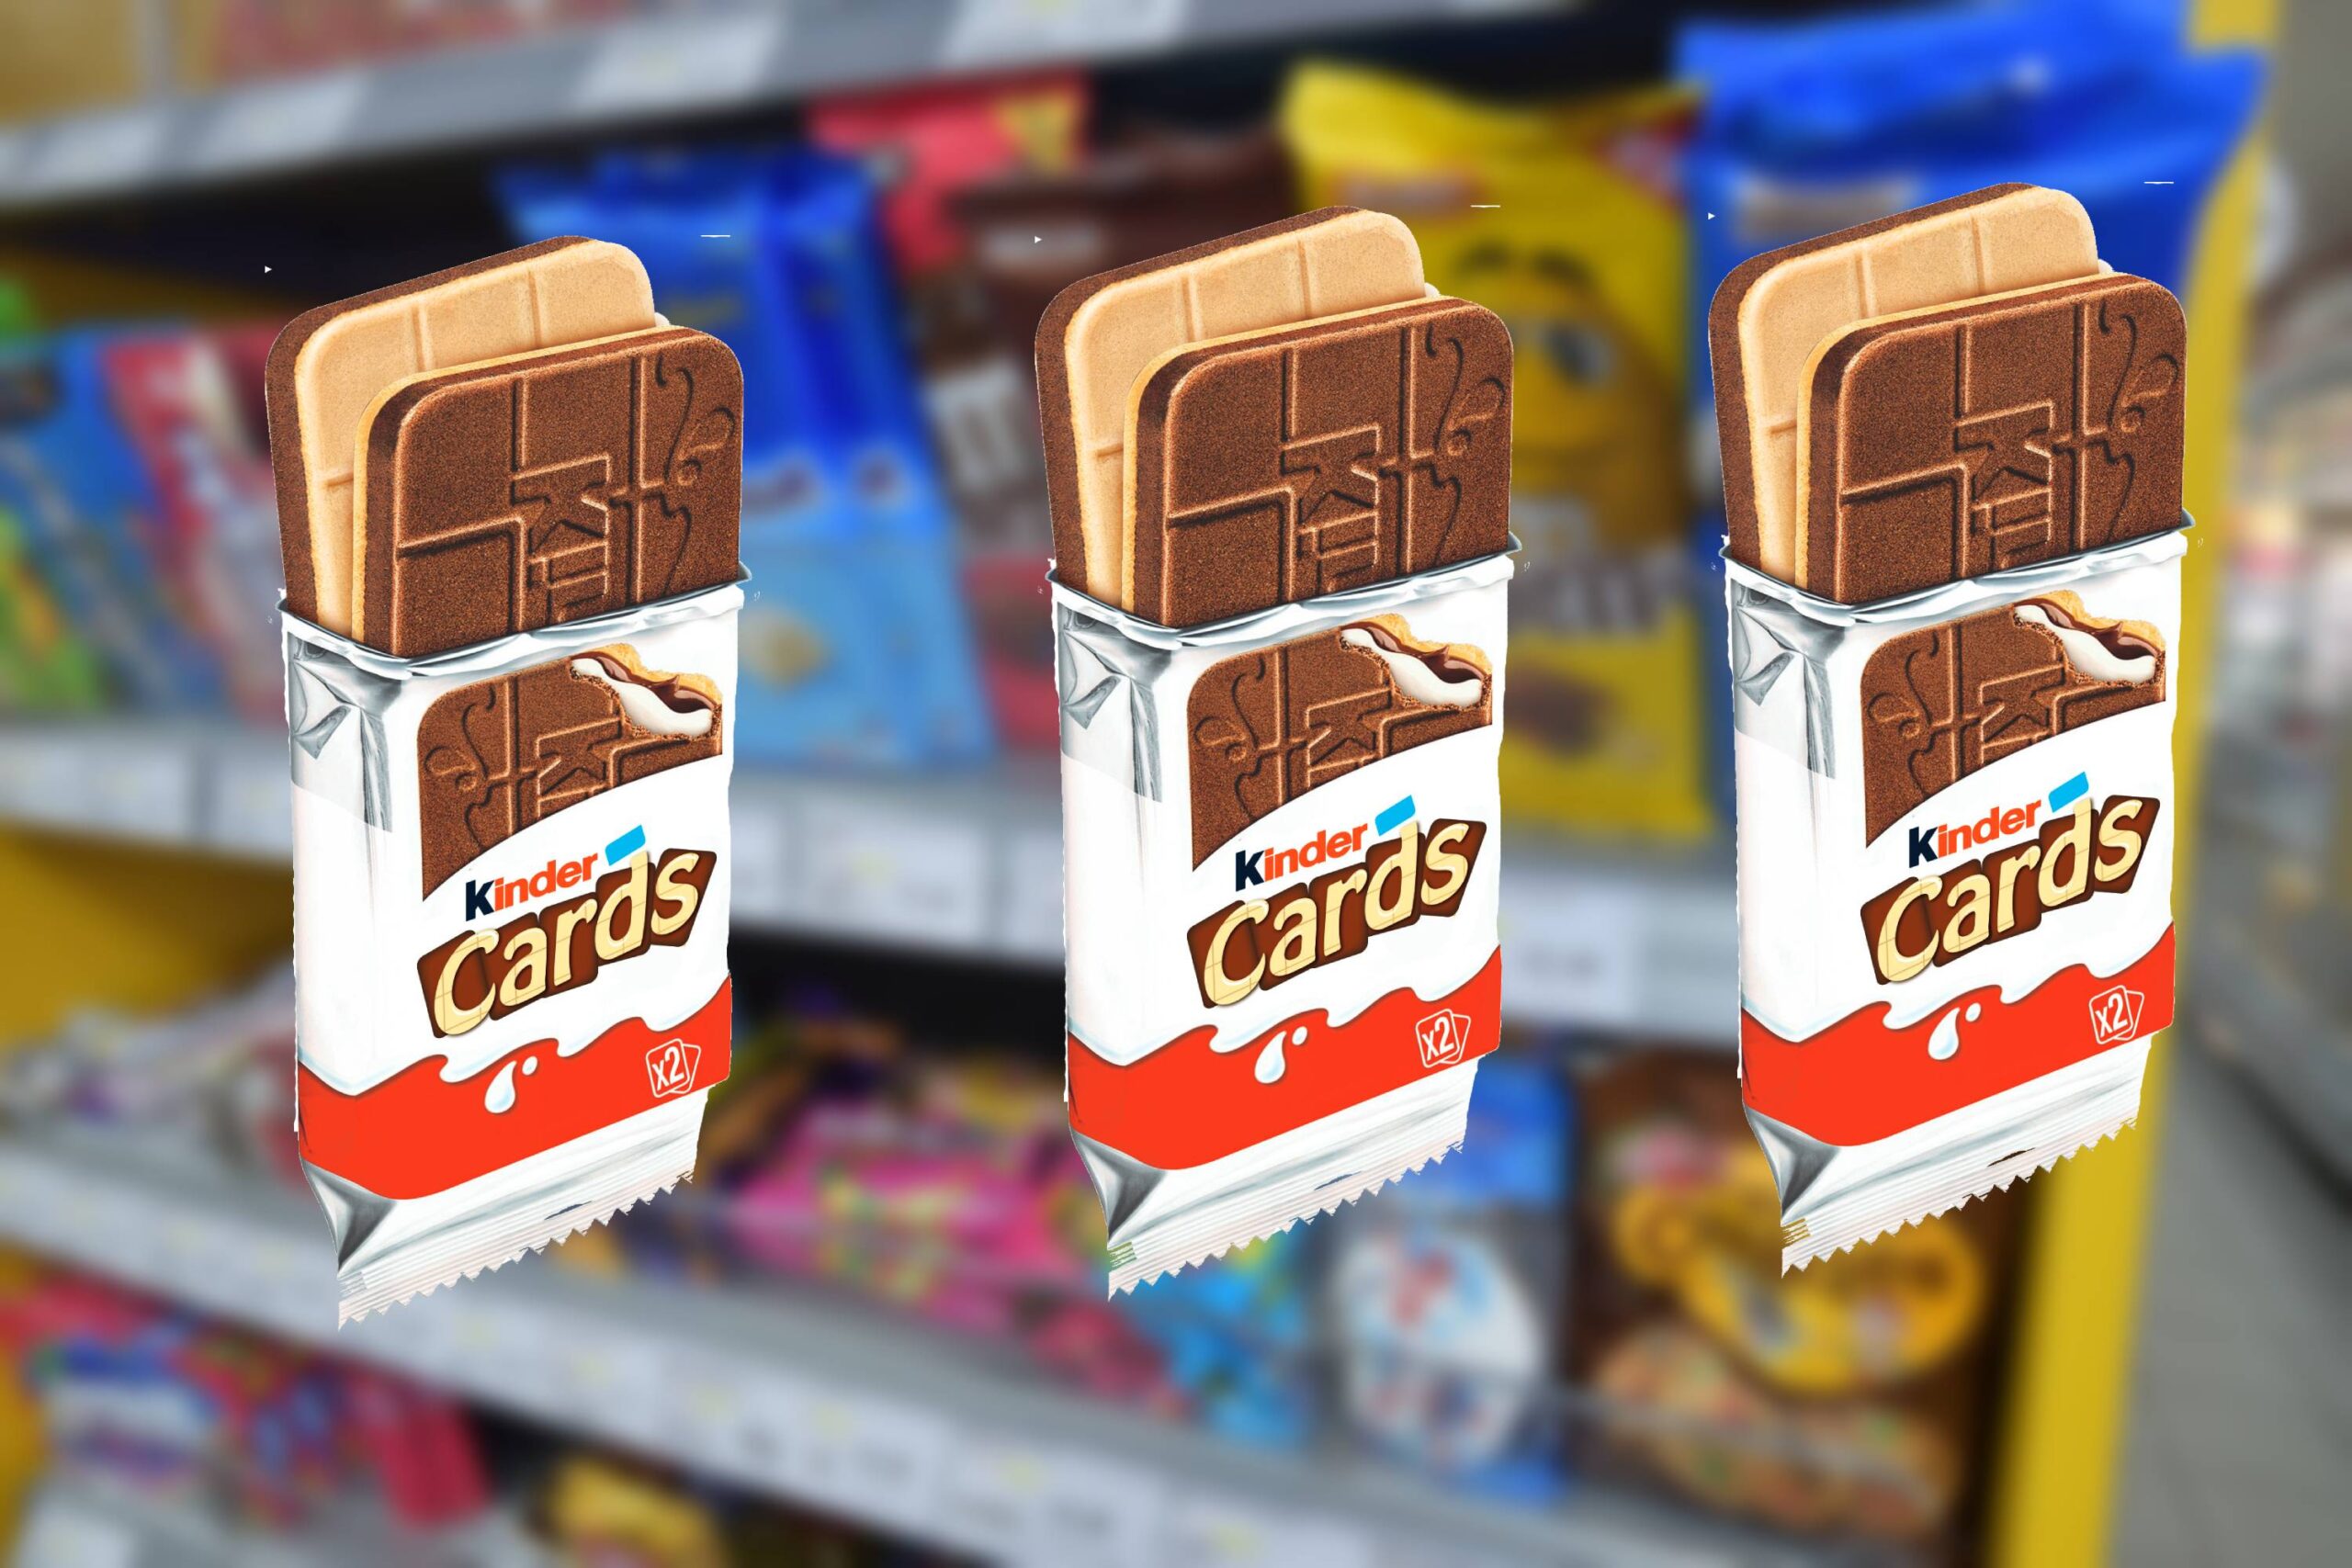 Kinder Cards now available in the UK - Better Retailing